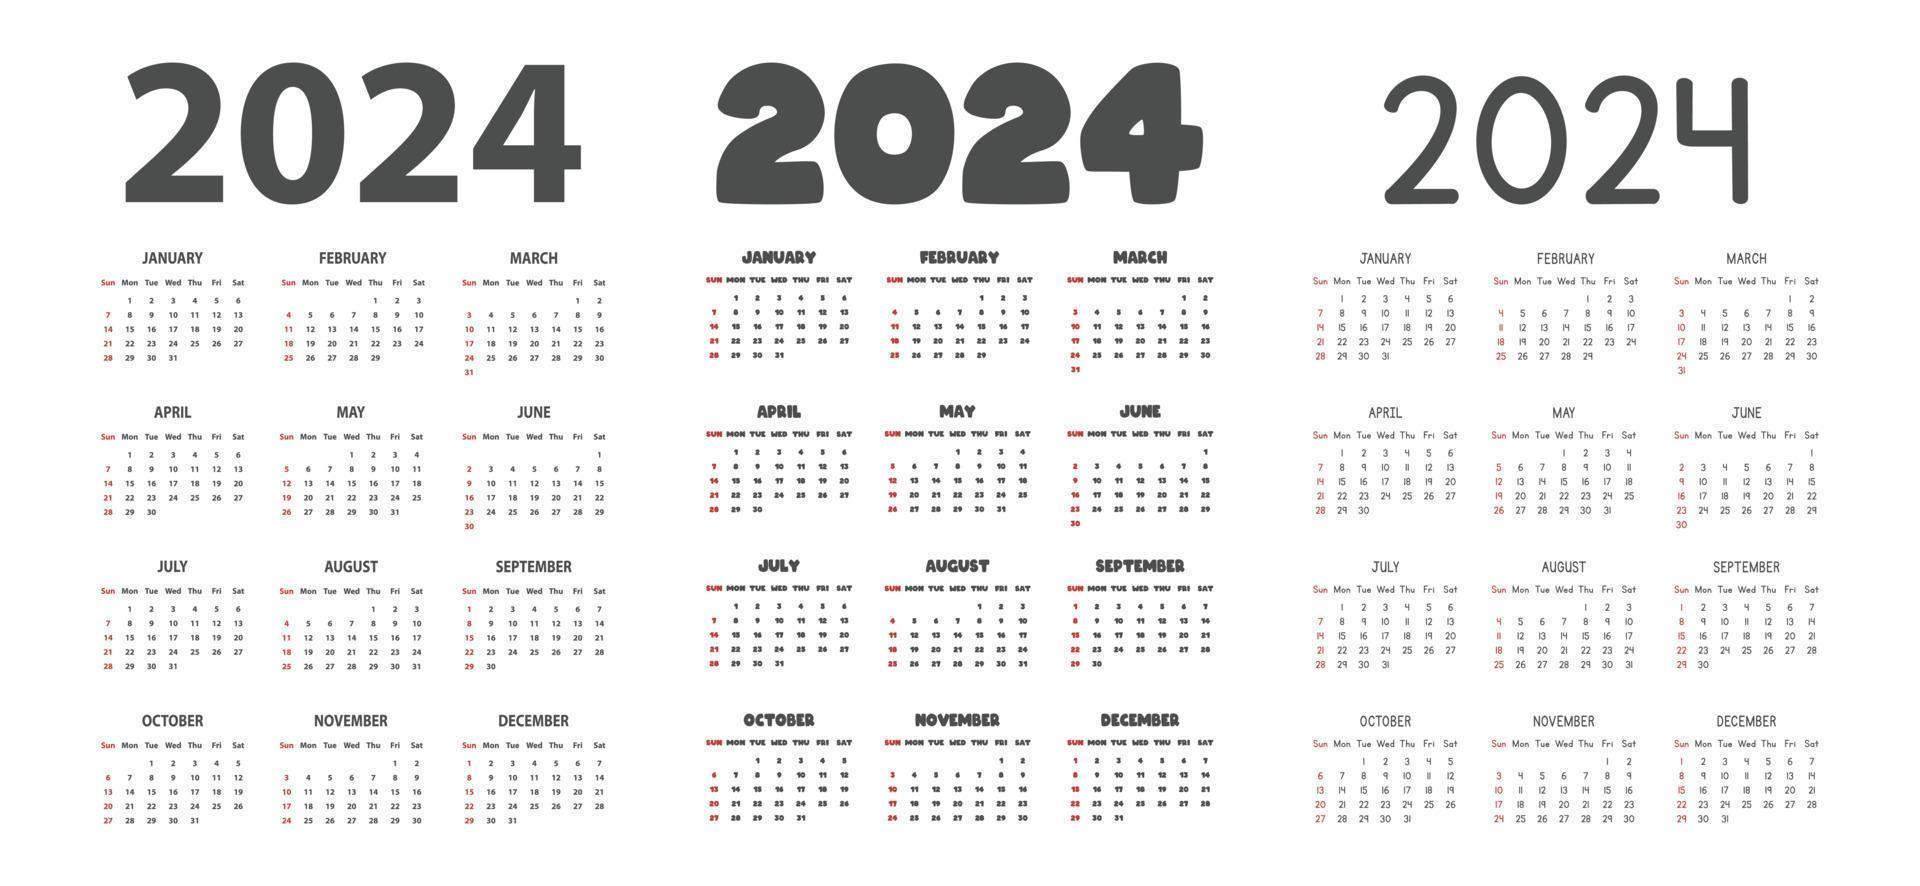 2024 calendar in different fonts style vector illustration. Simple classic monthly calendar for 2024 in sans, bold, cartoon font. The week starts Sunday. Minimalist calendar planner year 2024 template